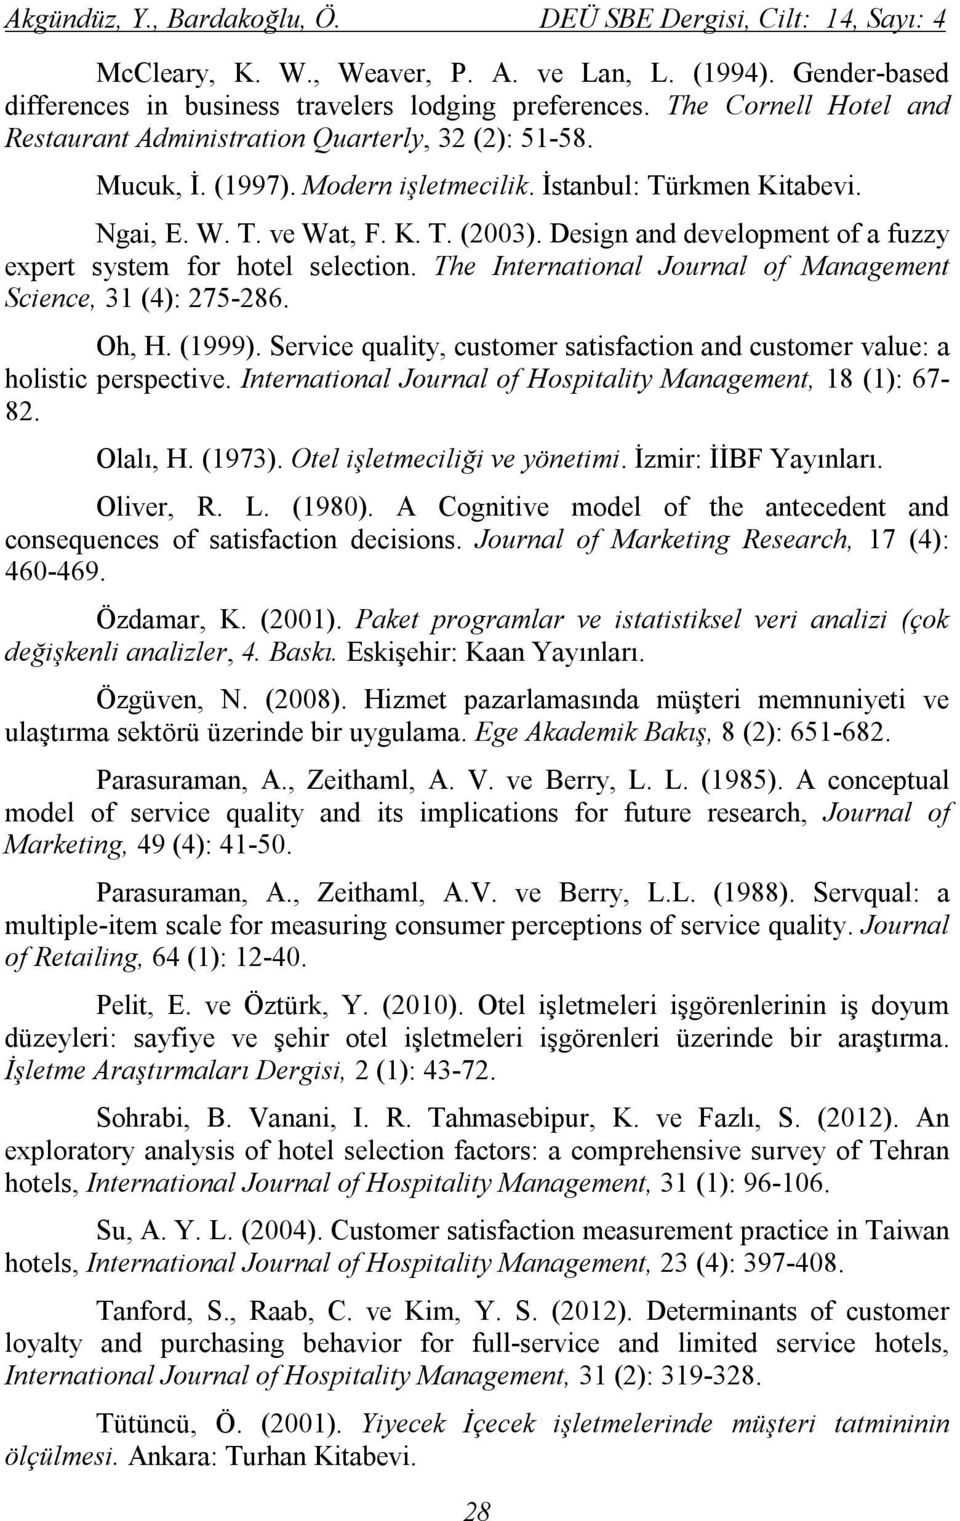 Design and development of a fuzzy expert system for hotel selection. The International Journal of Management Science, 31 (4): 275-286. Oh, H. (1999).